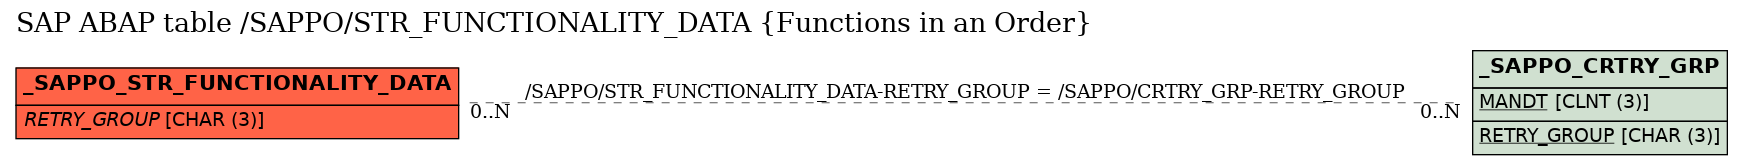 E-R Diagram for table /SAPPO/STR_FUNCTIONALITY_DATA (Functions in an Order)